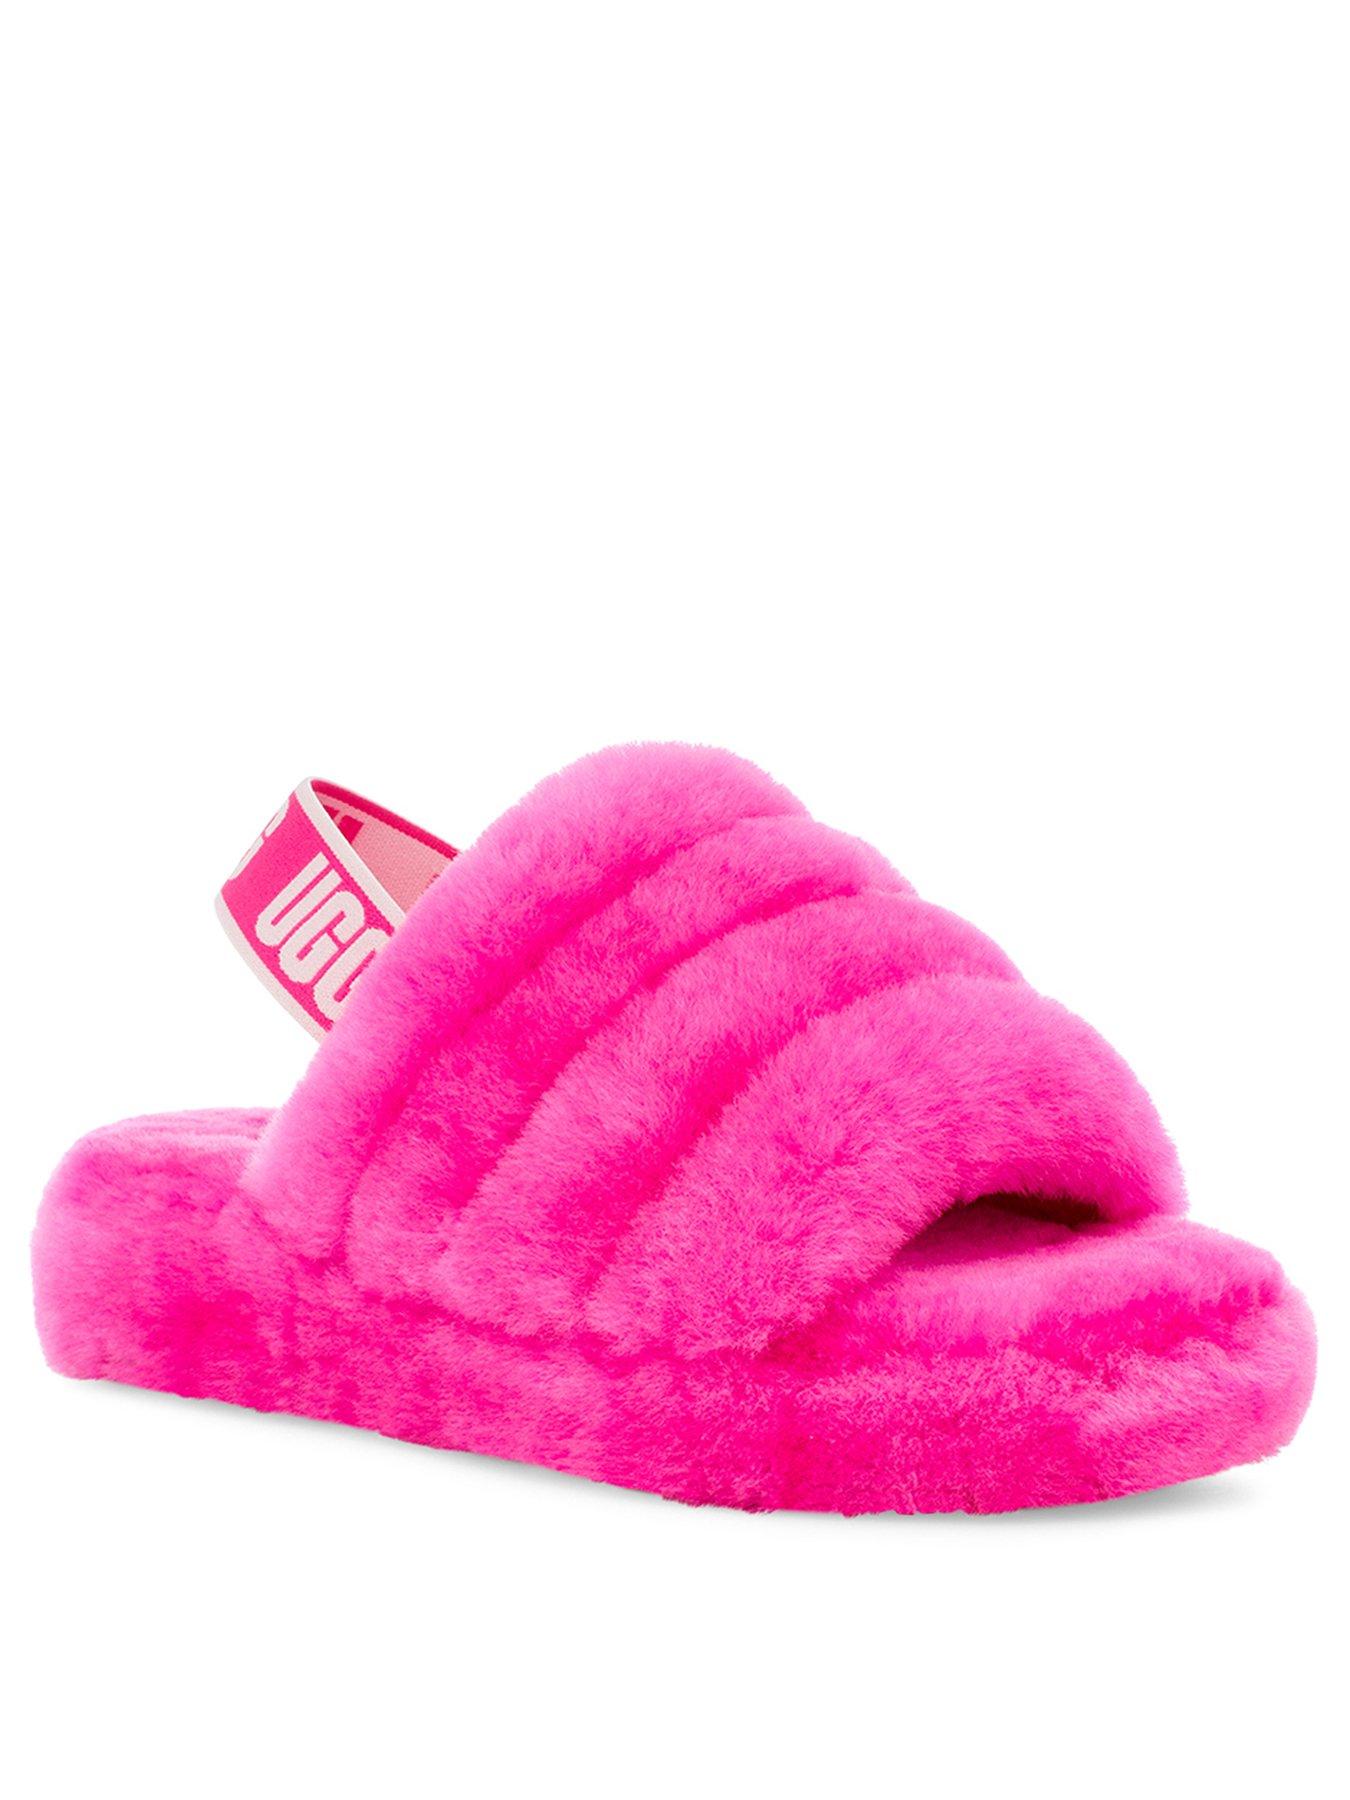 ugg fluff yeah slippers pink